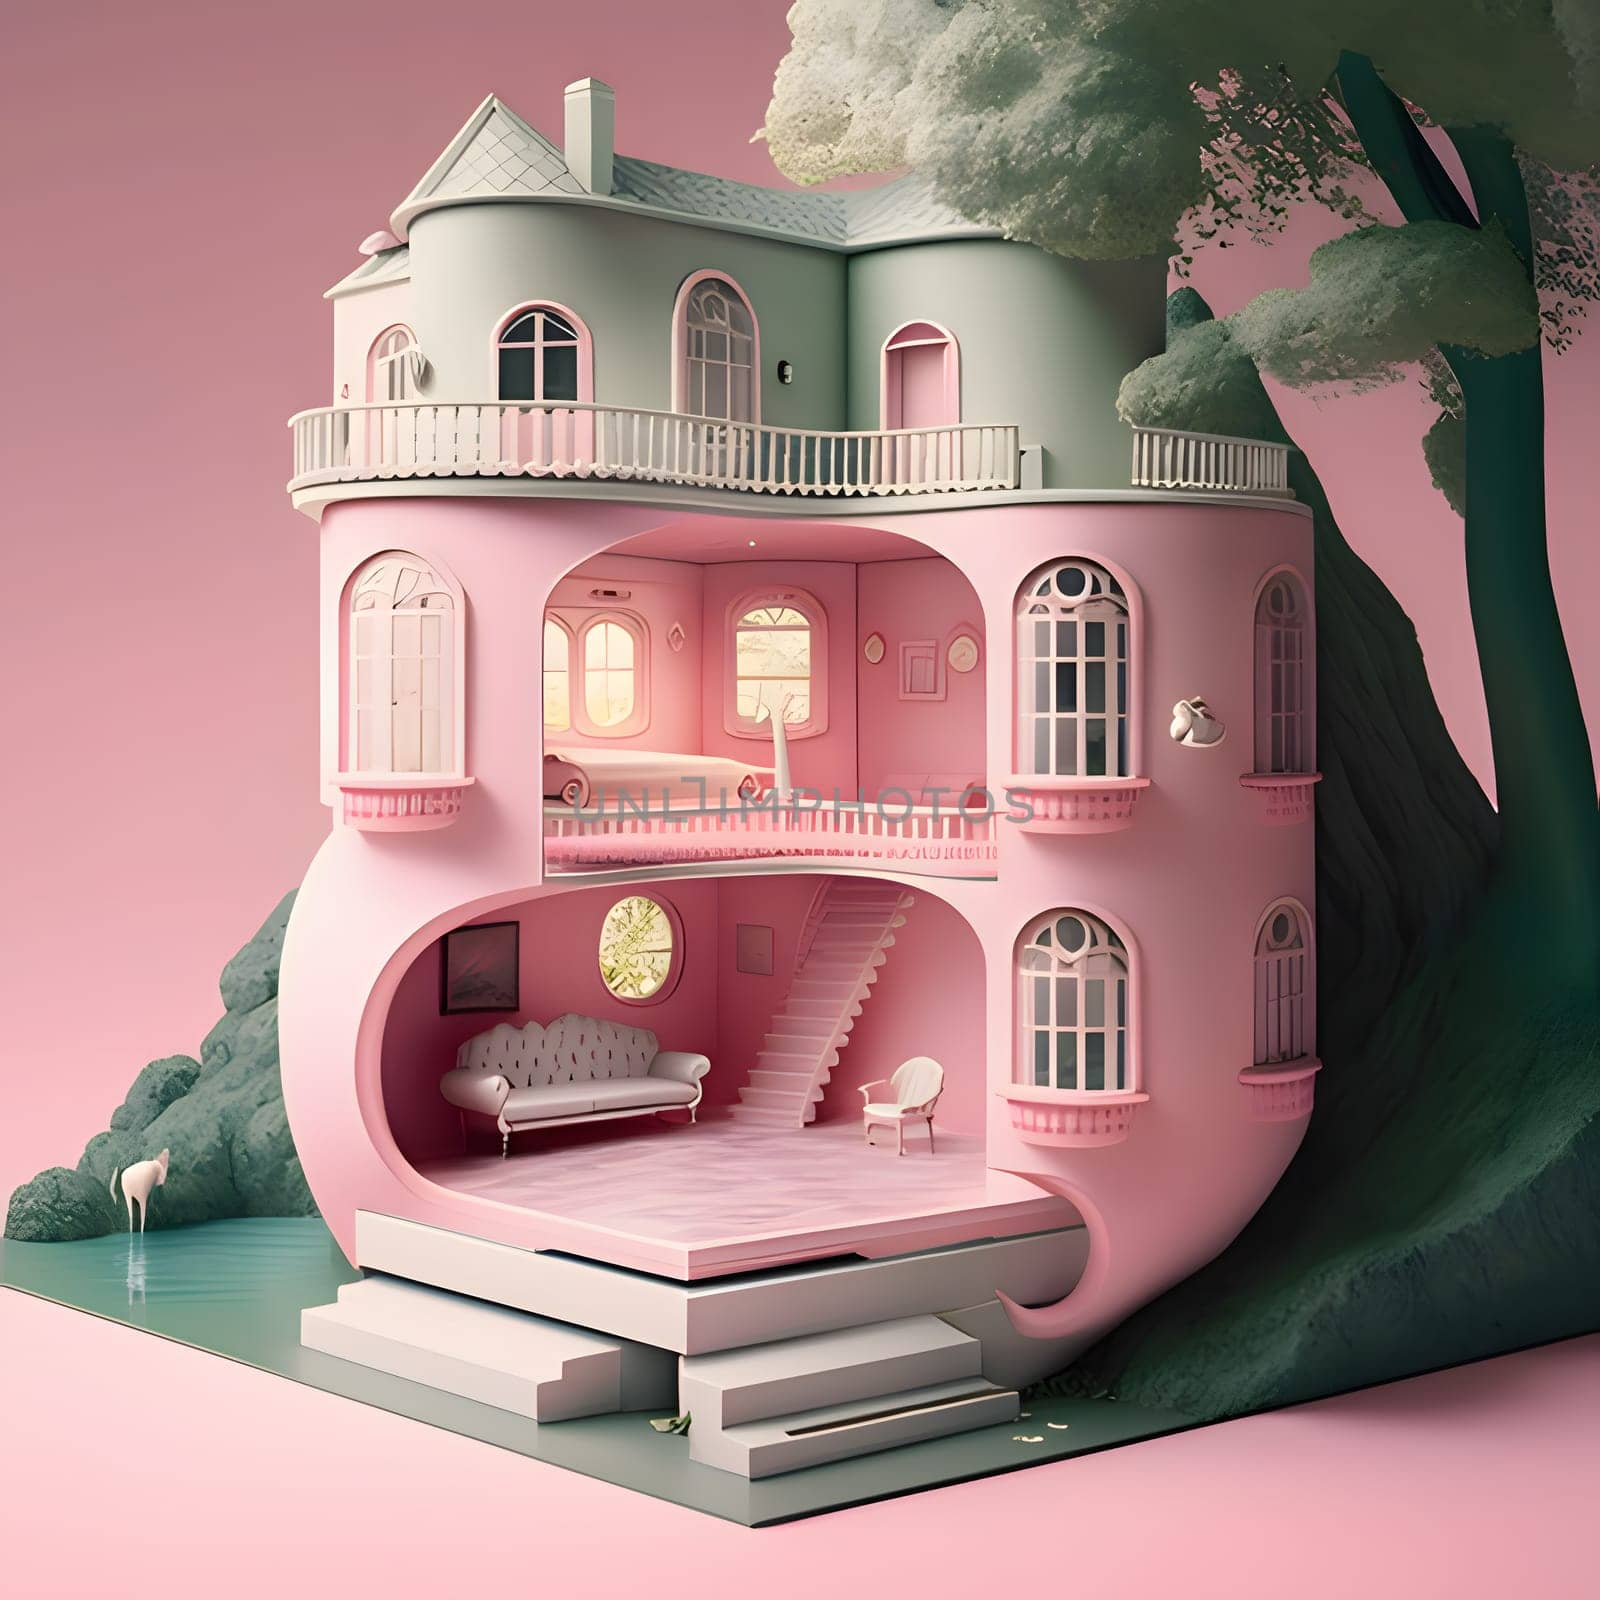 A delightful Barbie-style pink house stands brightly against the background, emanating a sense of joy and playfulness with its charming design.